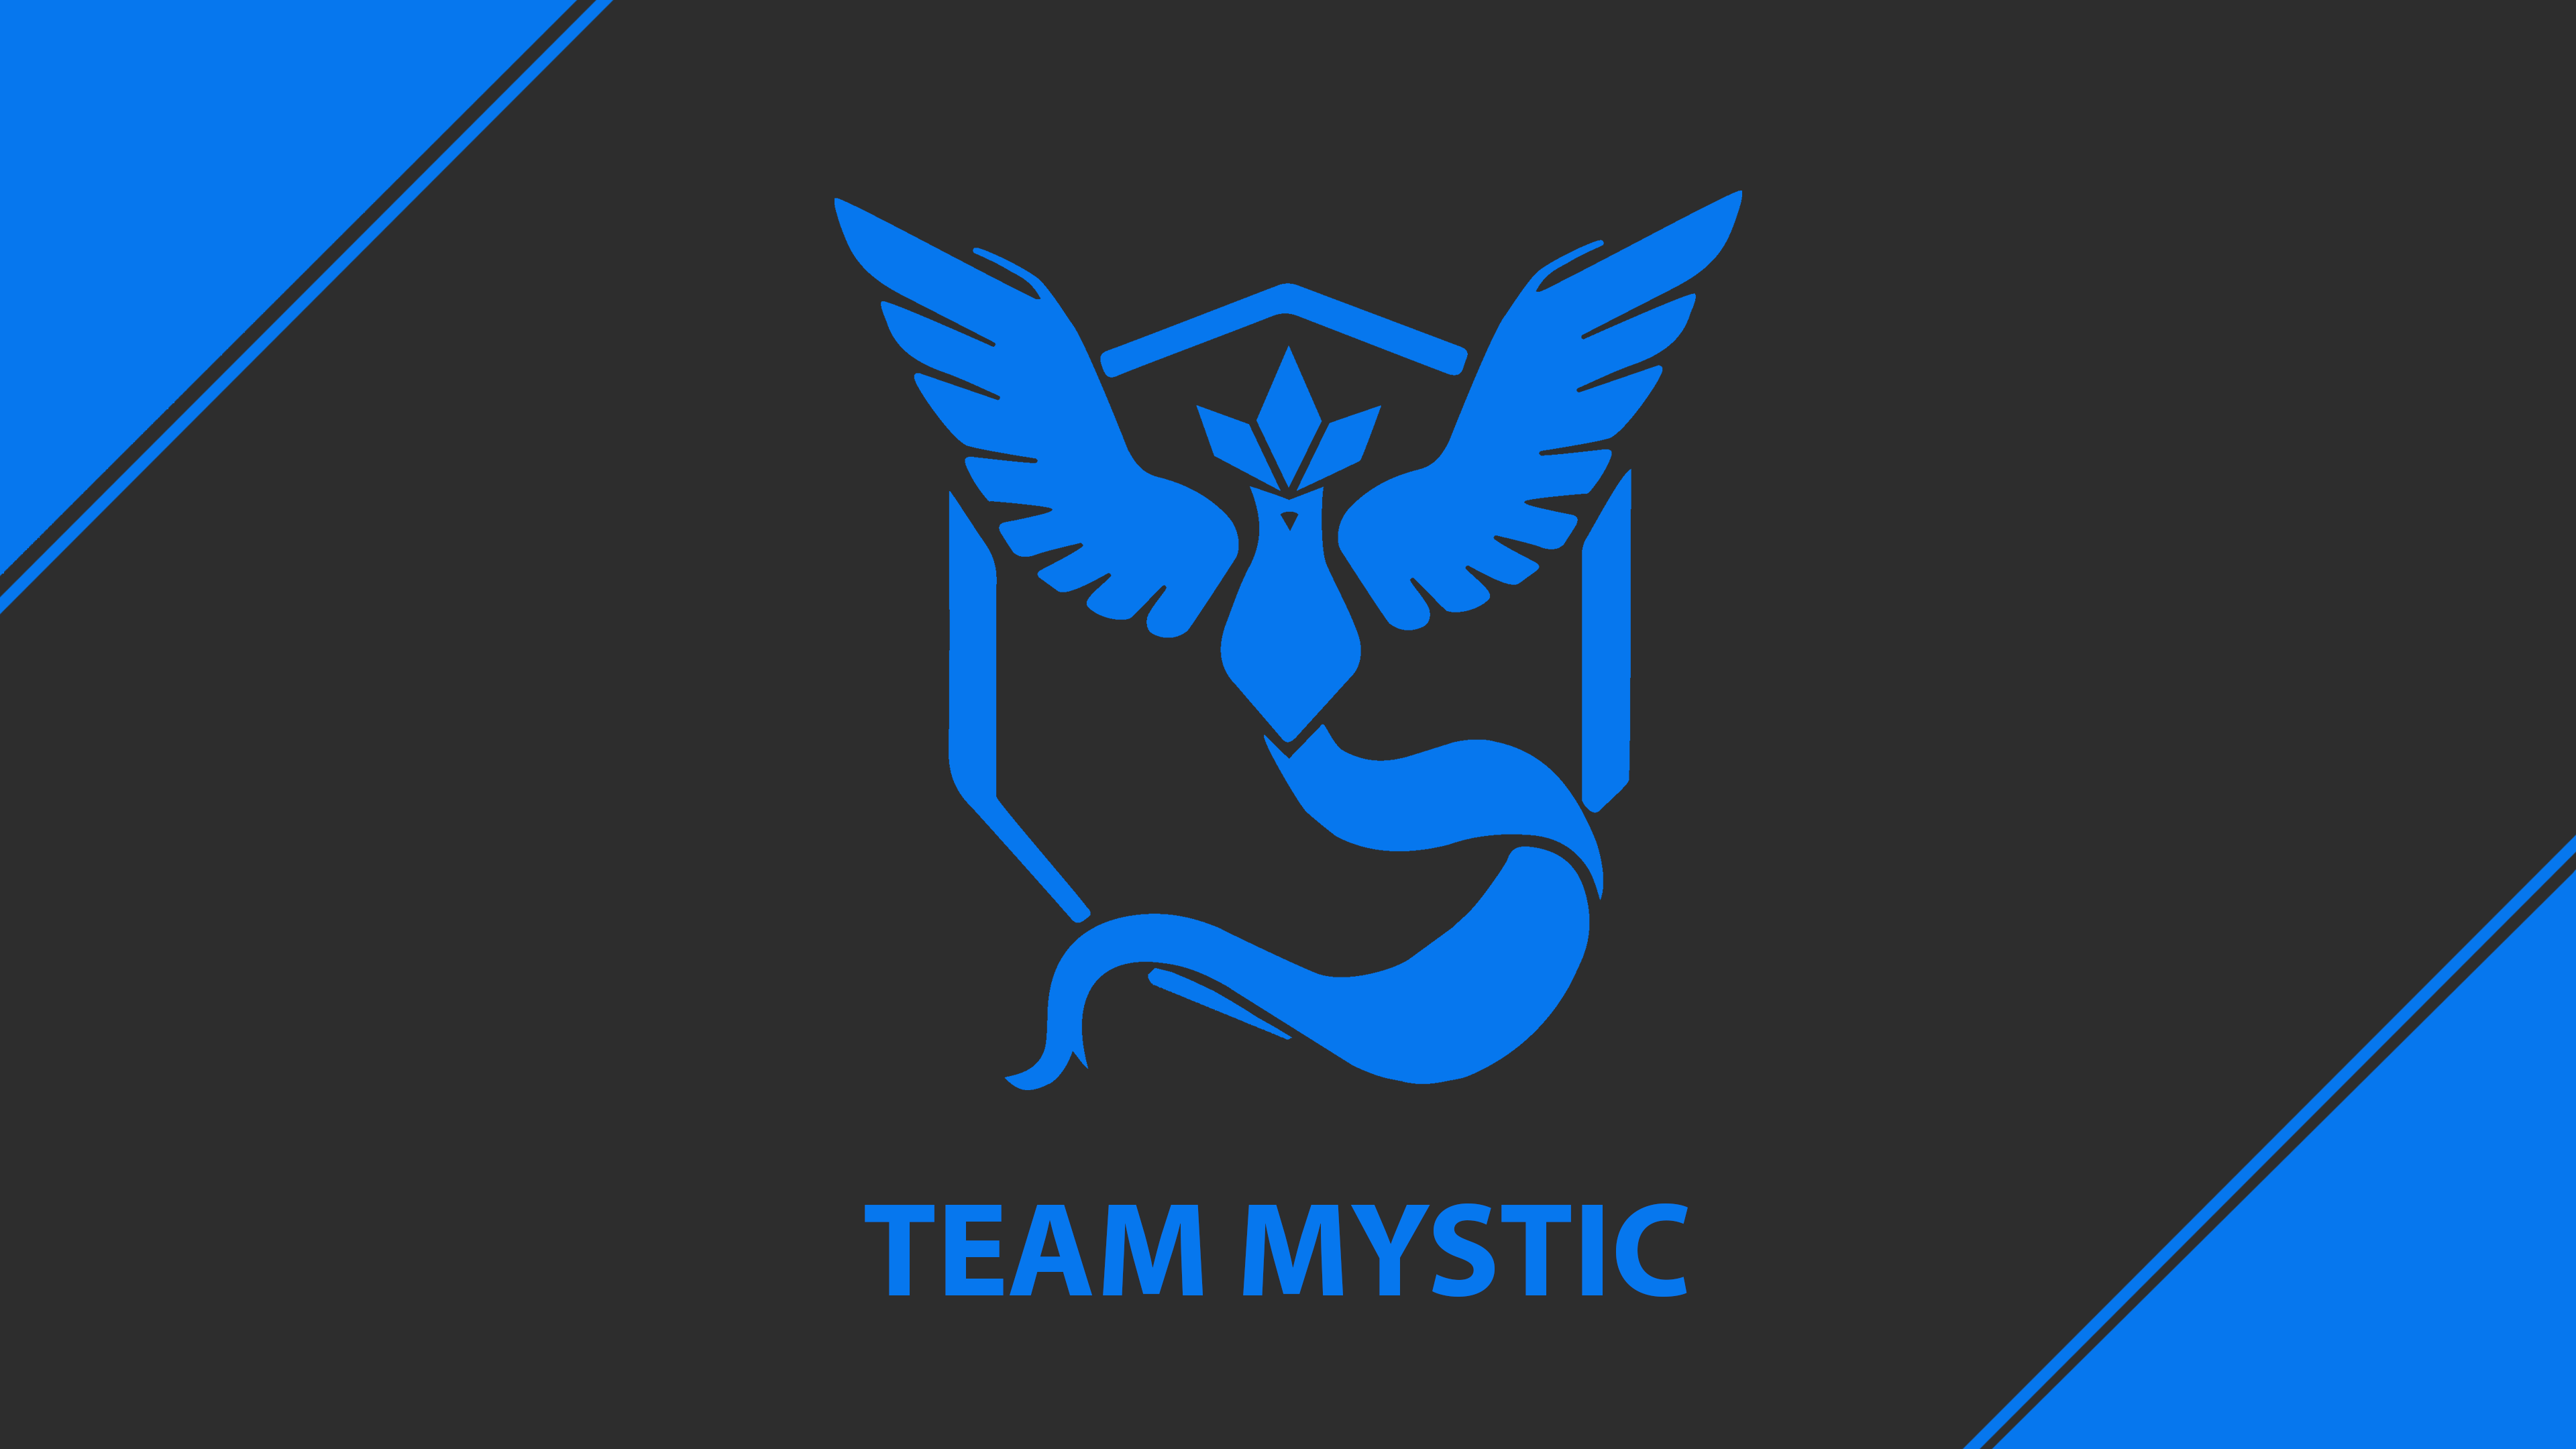 Team Mystic Wallpaper by Hebulicore